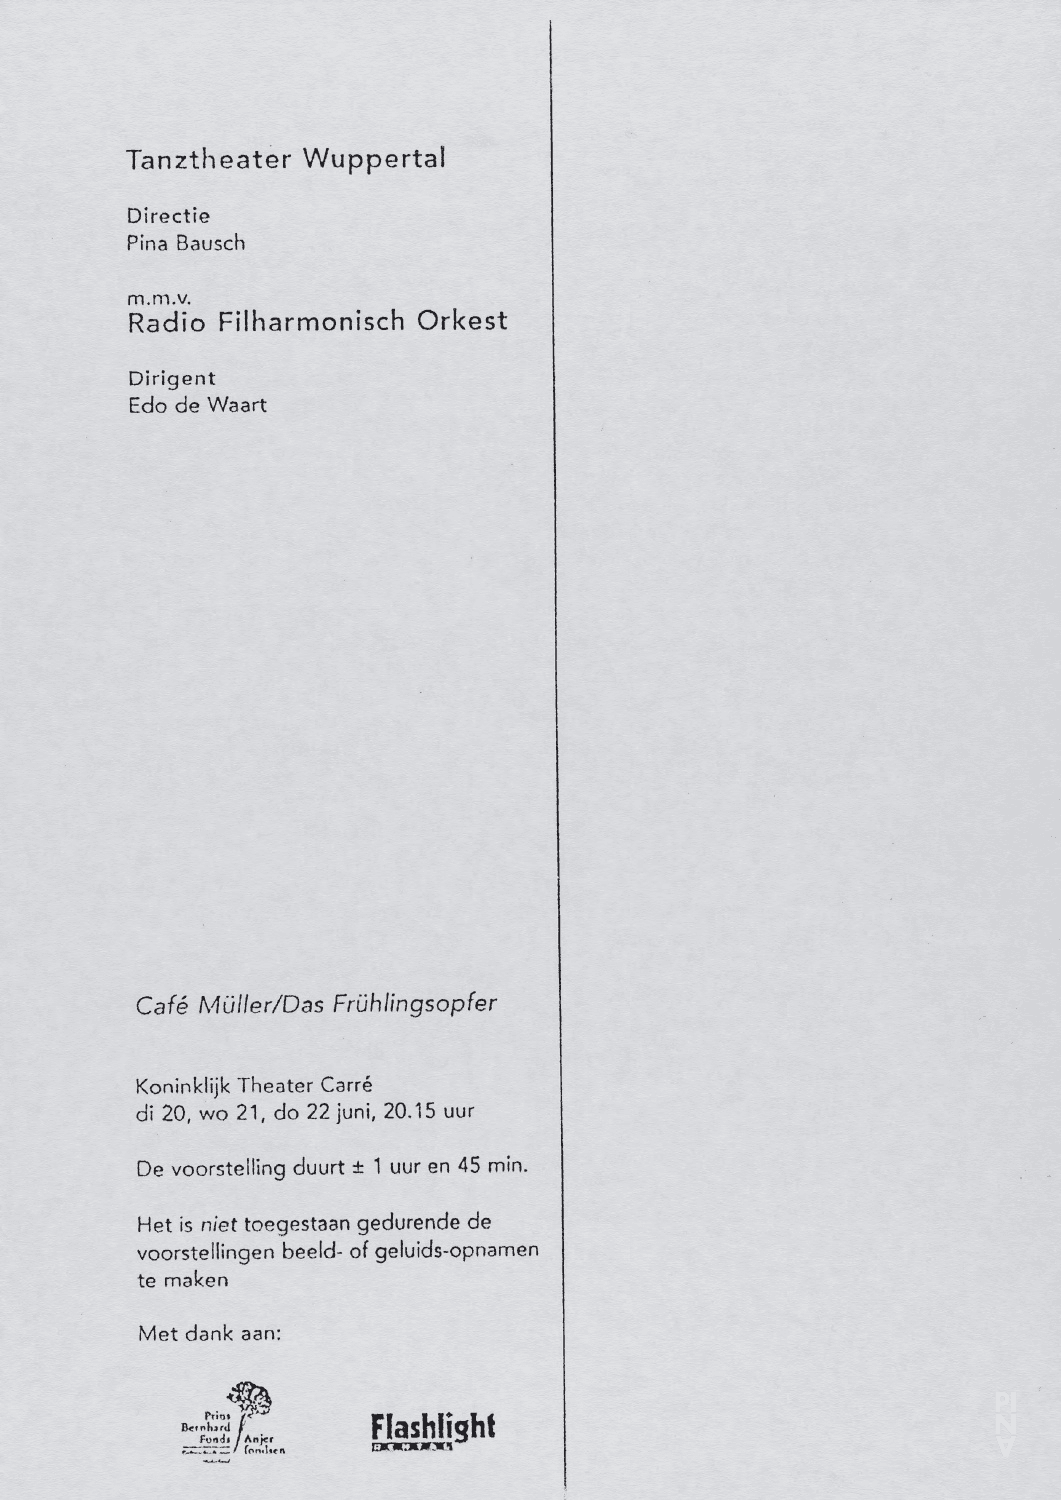 Evening leaflet for “Café Müller” and “The Rite of Spring” by Pina Bausch with Tanztheater Wuppertal in in Amsterdam, 06/20/1995 – 06/22/1995